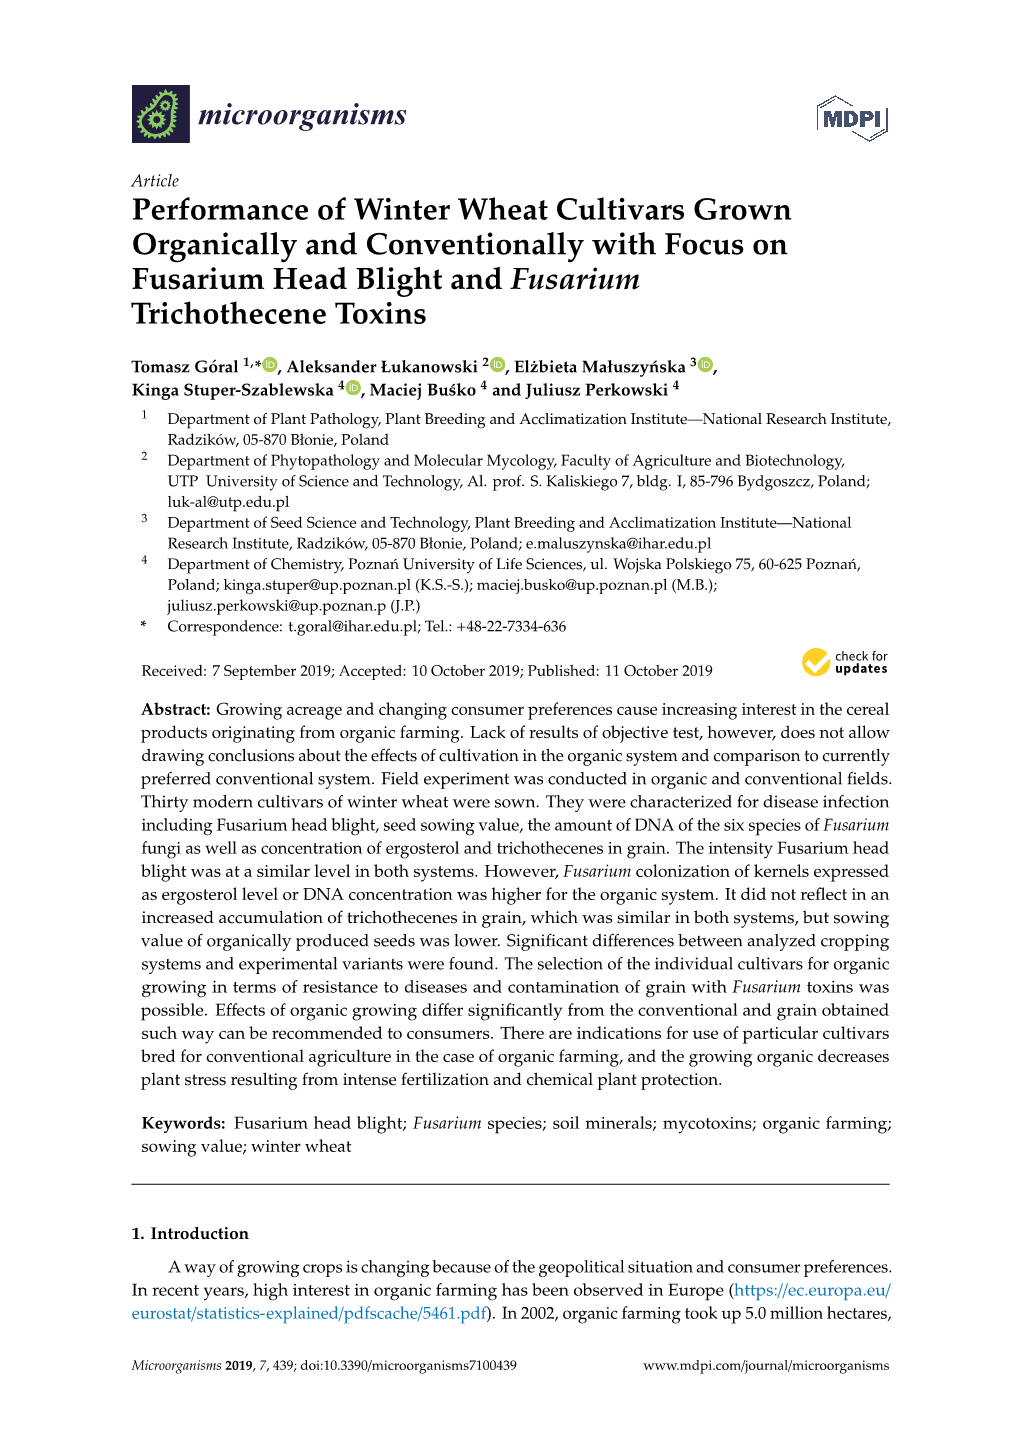 Performance of Winter Wheat Cultivars Grown Organically and Conventionally with Focus on Fusarium Head Blight and Fusarium Trichothecene Toxins